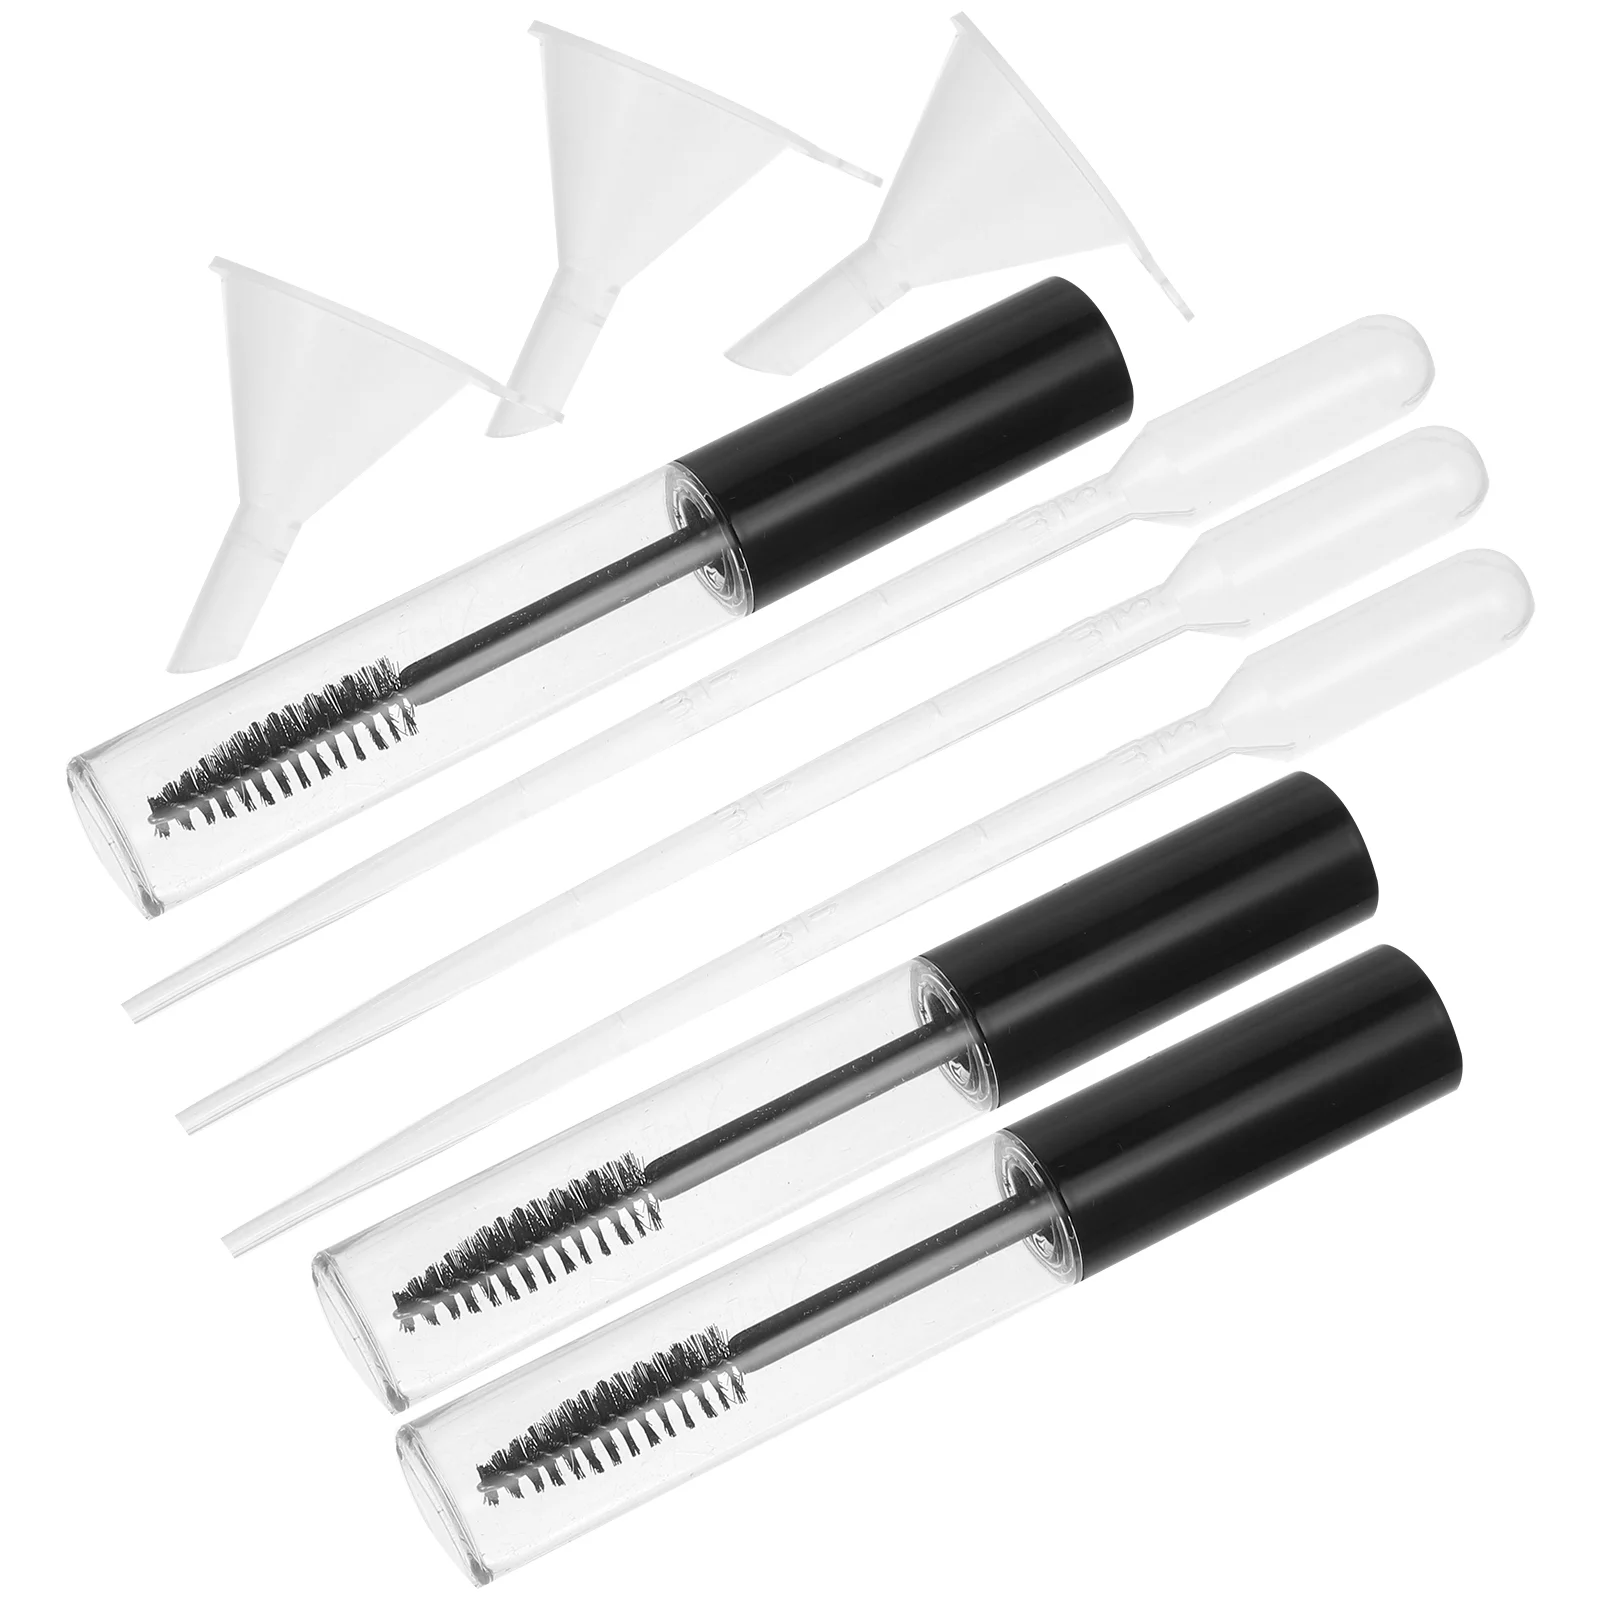 

3 Pcs Transfer Pipettes Empty Mascara Tube with Eyelash Wand Lipgloss Cover 10ml Container Funnel Spoolies